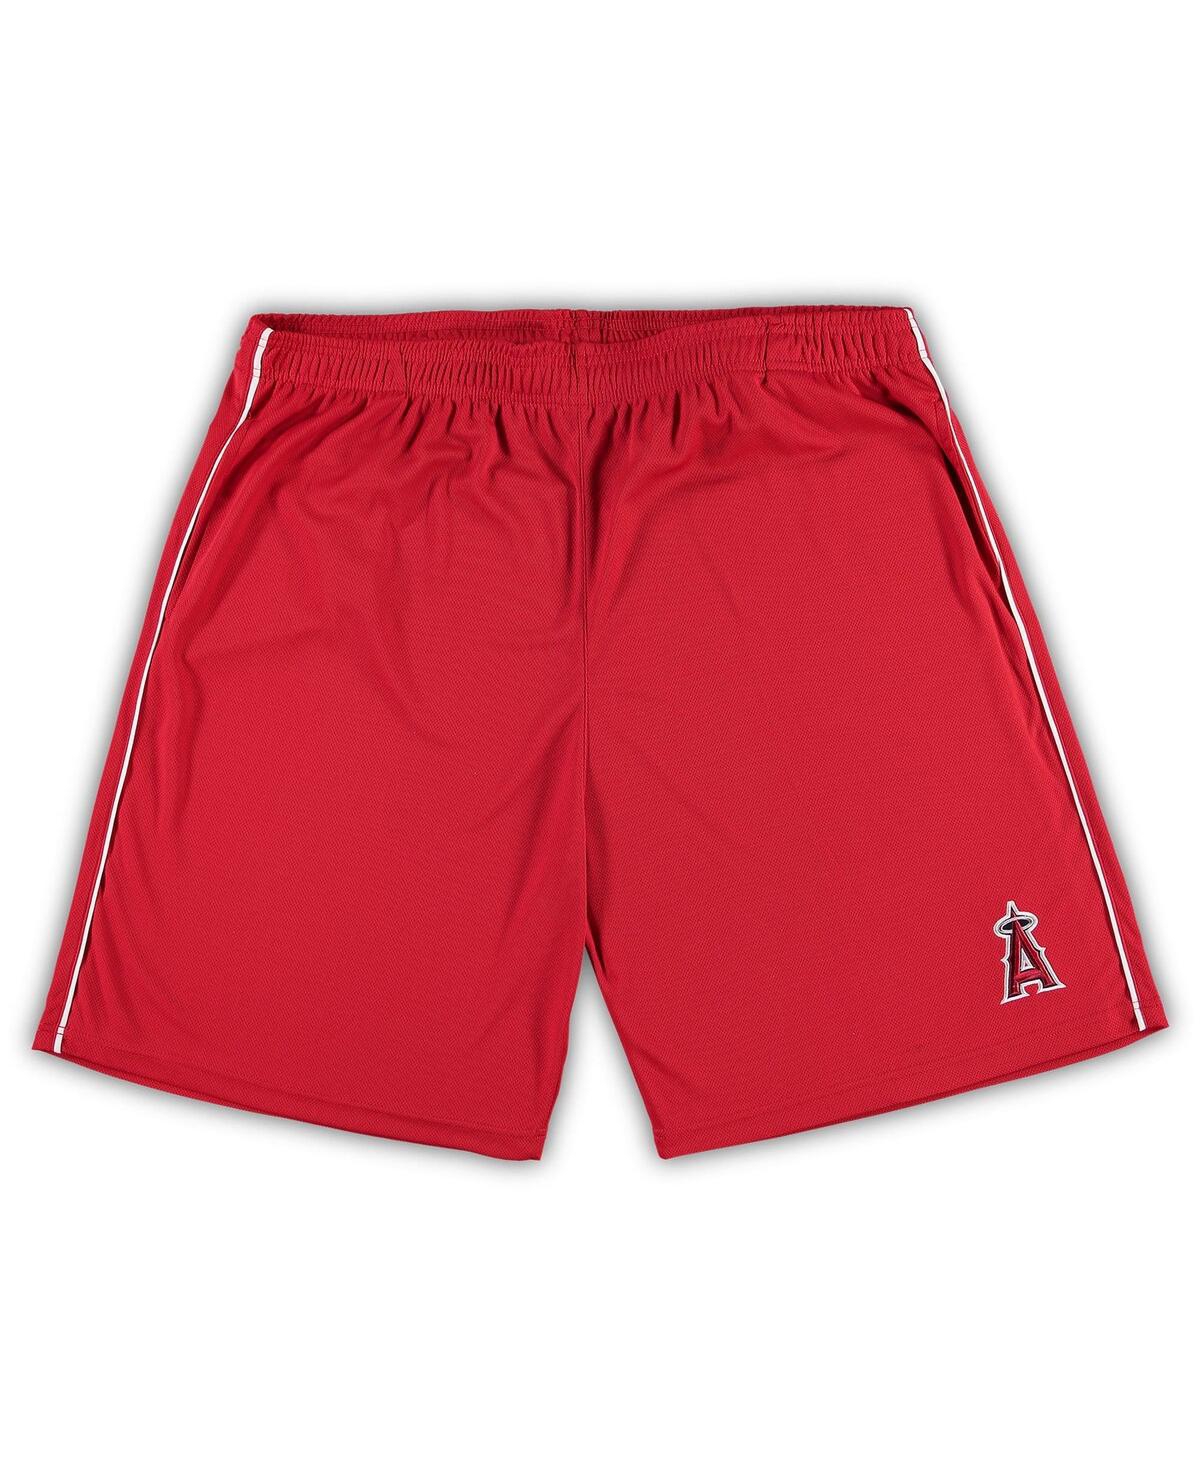 PROFILE MEN'S RED LOS ANGELES ANGELS BIG AND TALL MESH SHORTS